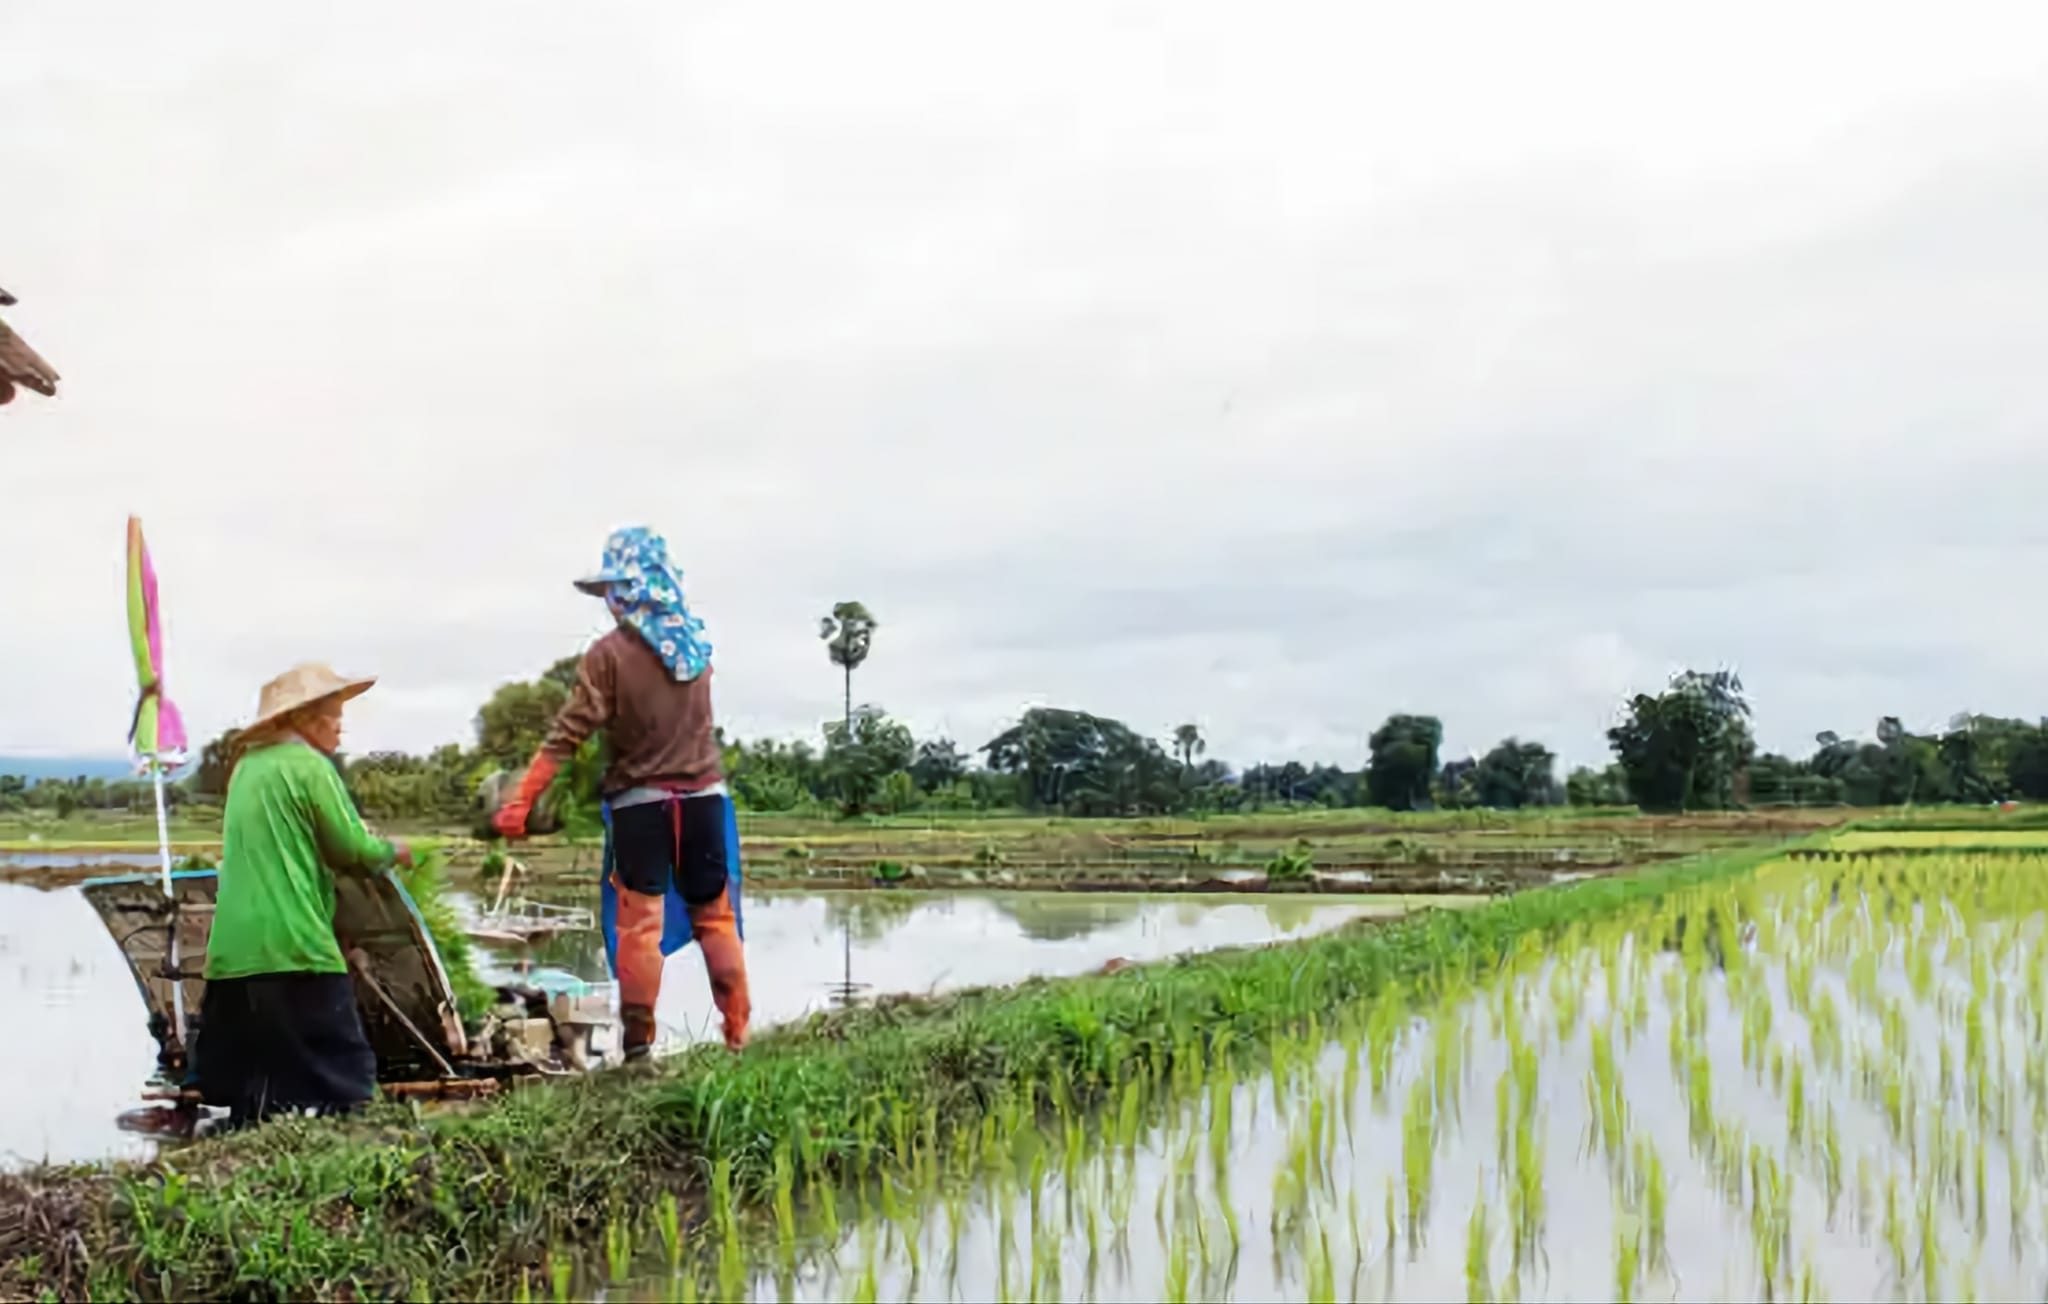 Facing climate challenges and rising costs, Palawan’s rice farmers turn to labor